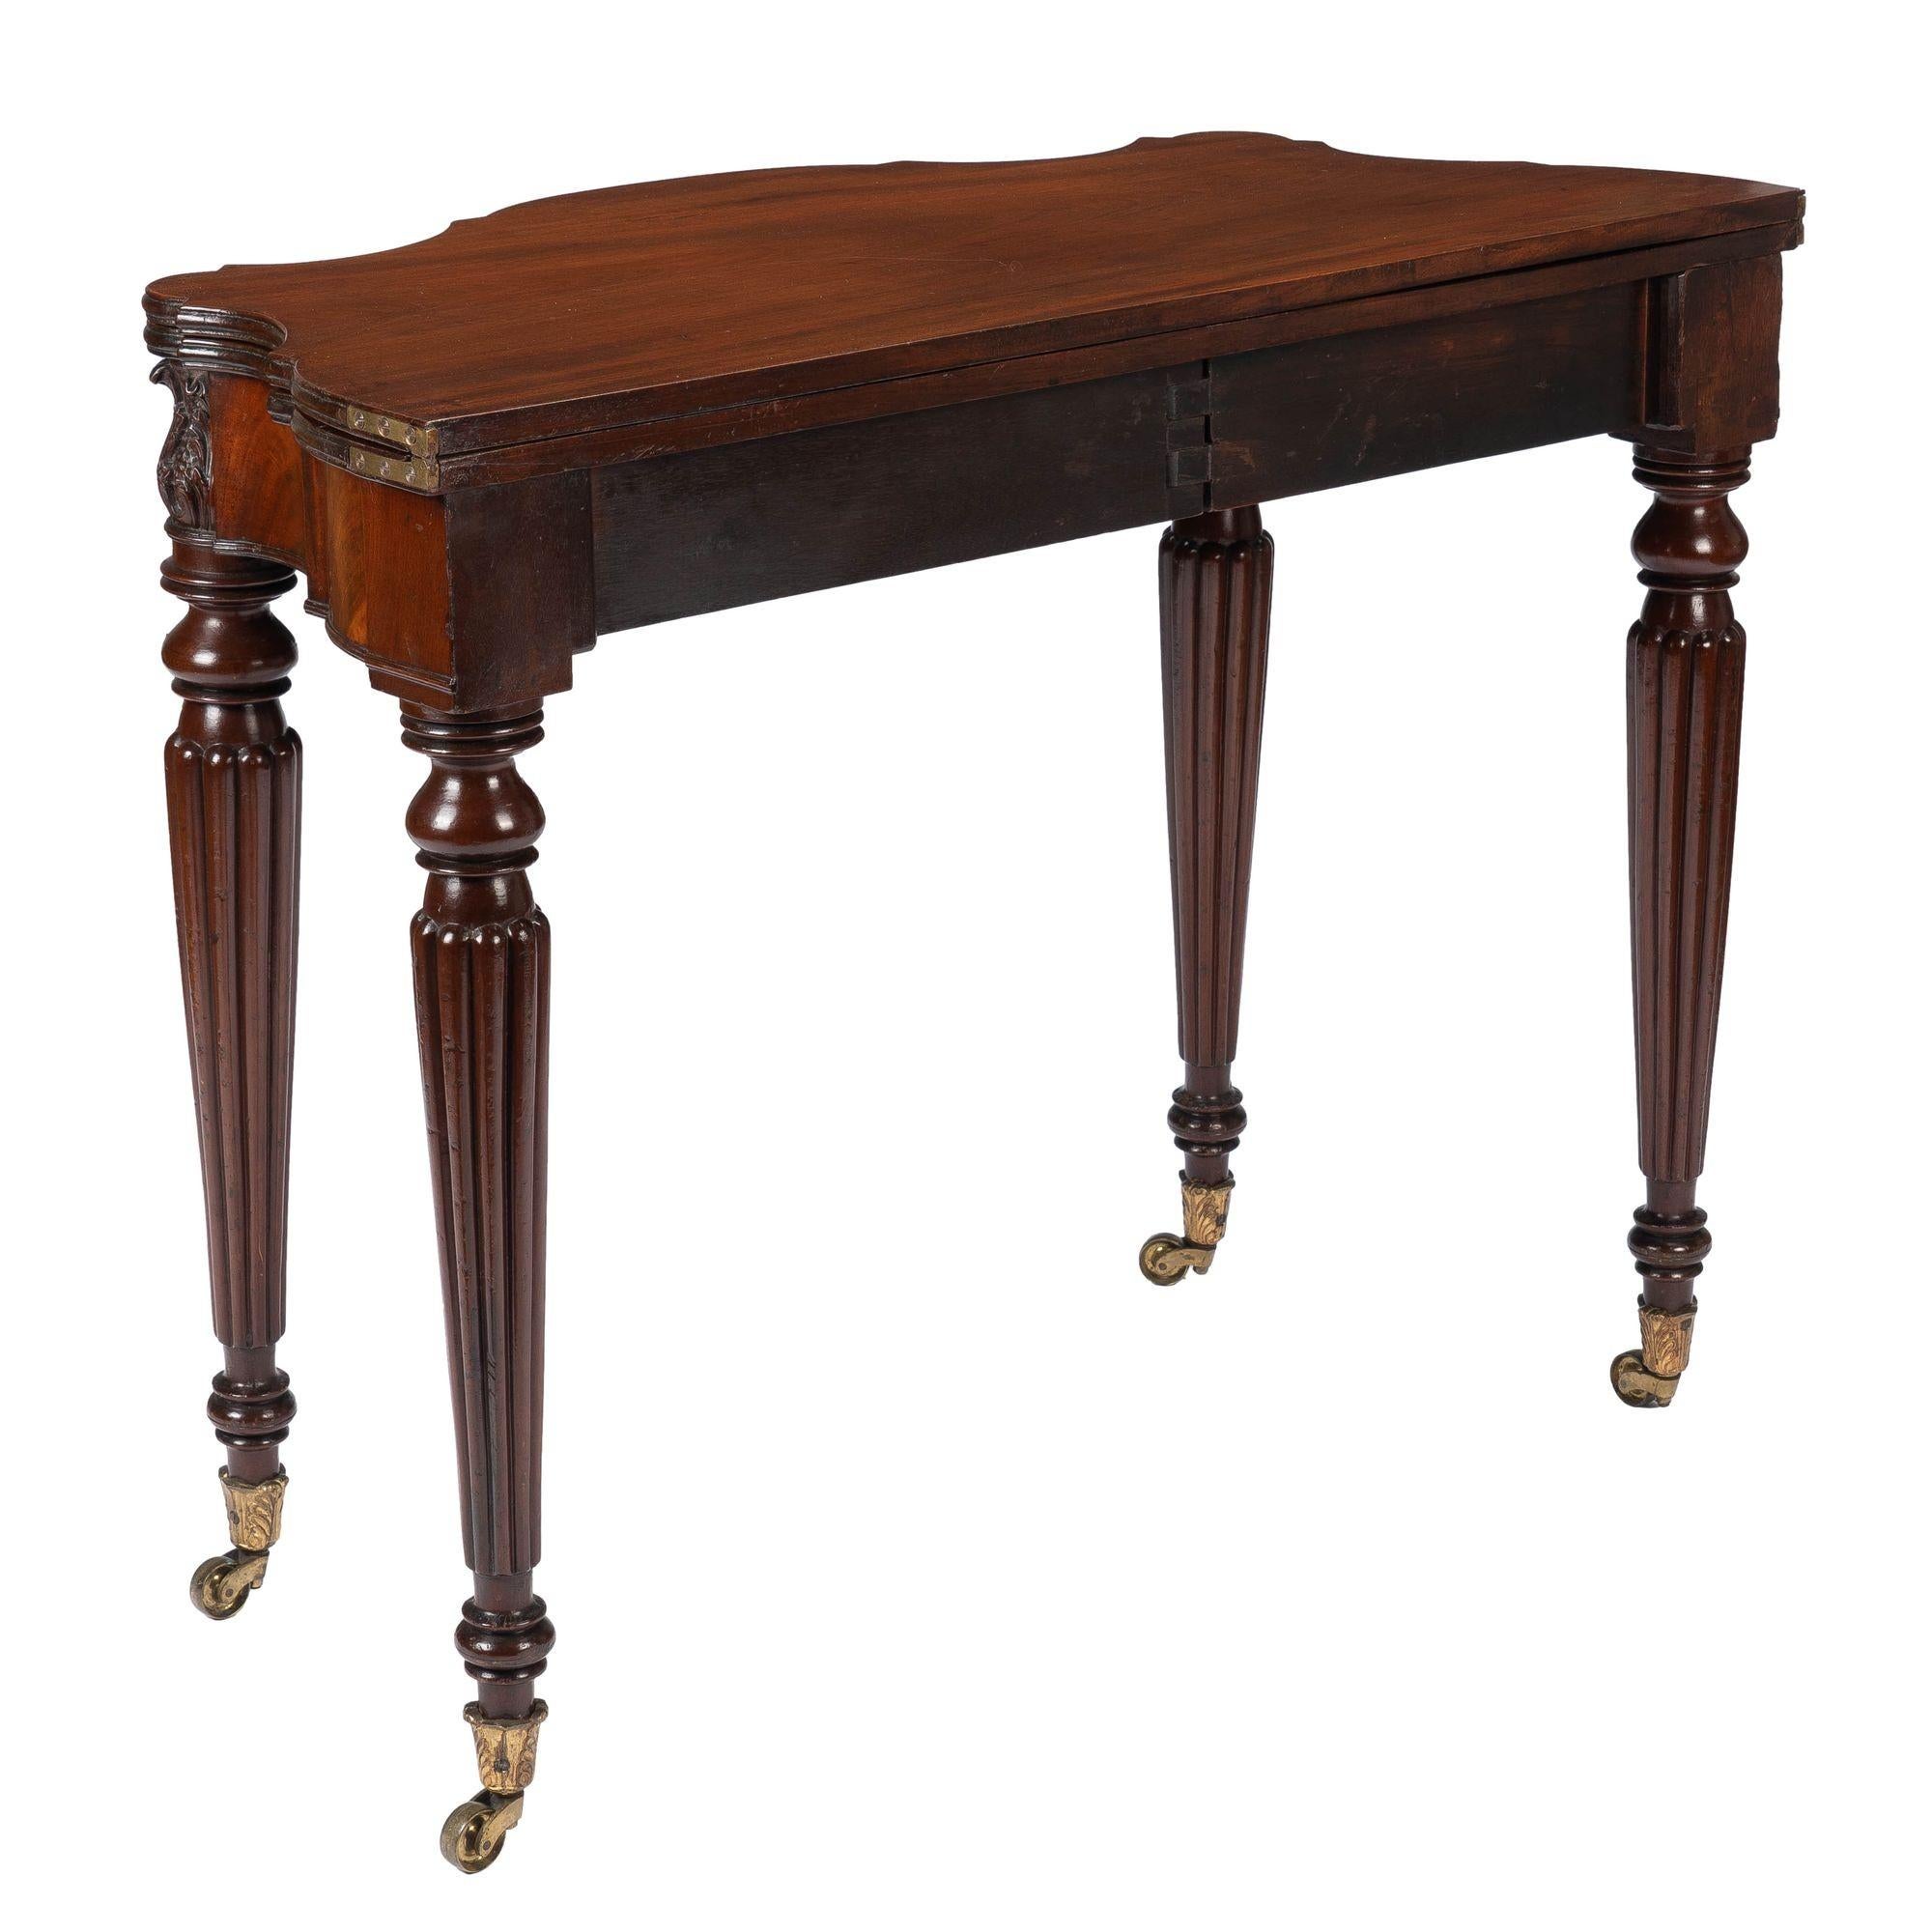 Samuel Field Macintire Attributed Mahogany Flip Top Game Table, c. 1810-15 In Good Condition For Sale In Kenilworth, IL